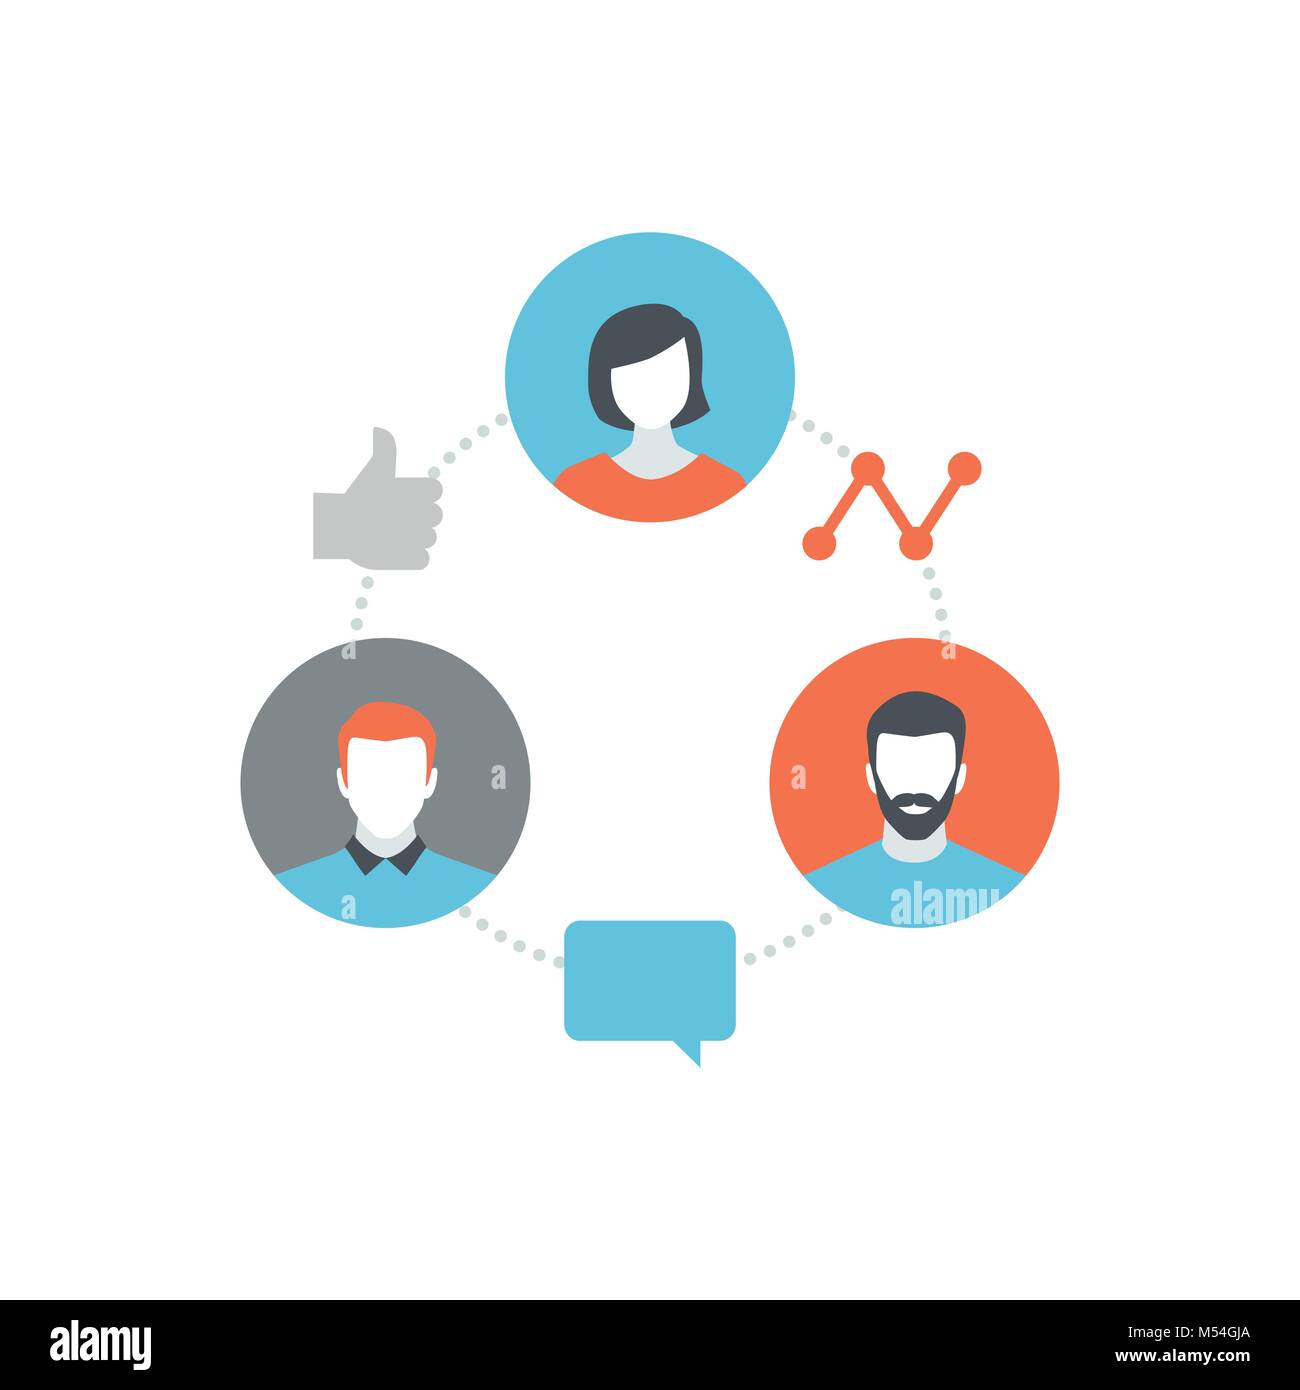 Users communicating in a network using social media: communication and technology concept Stock Vector